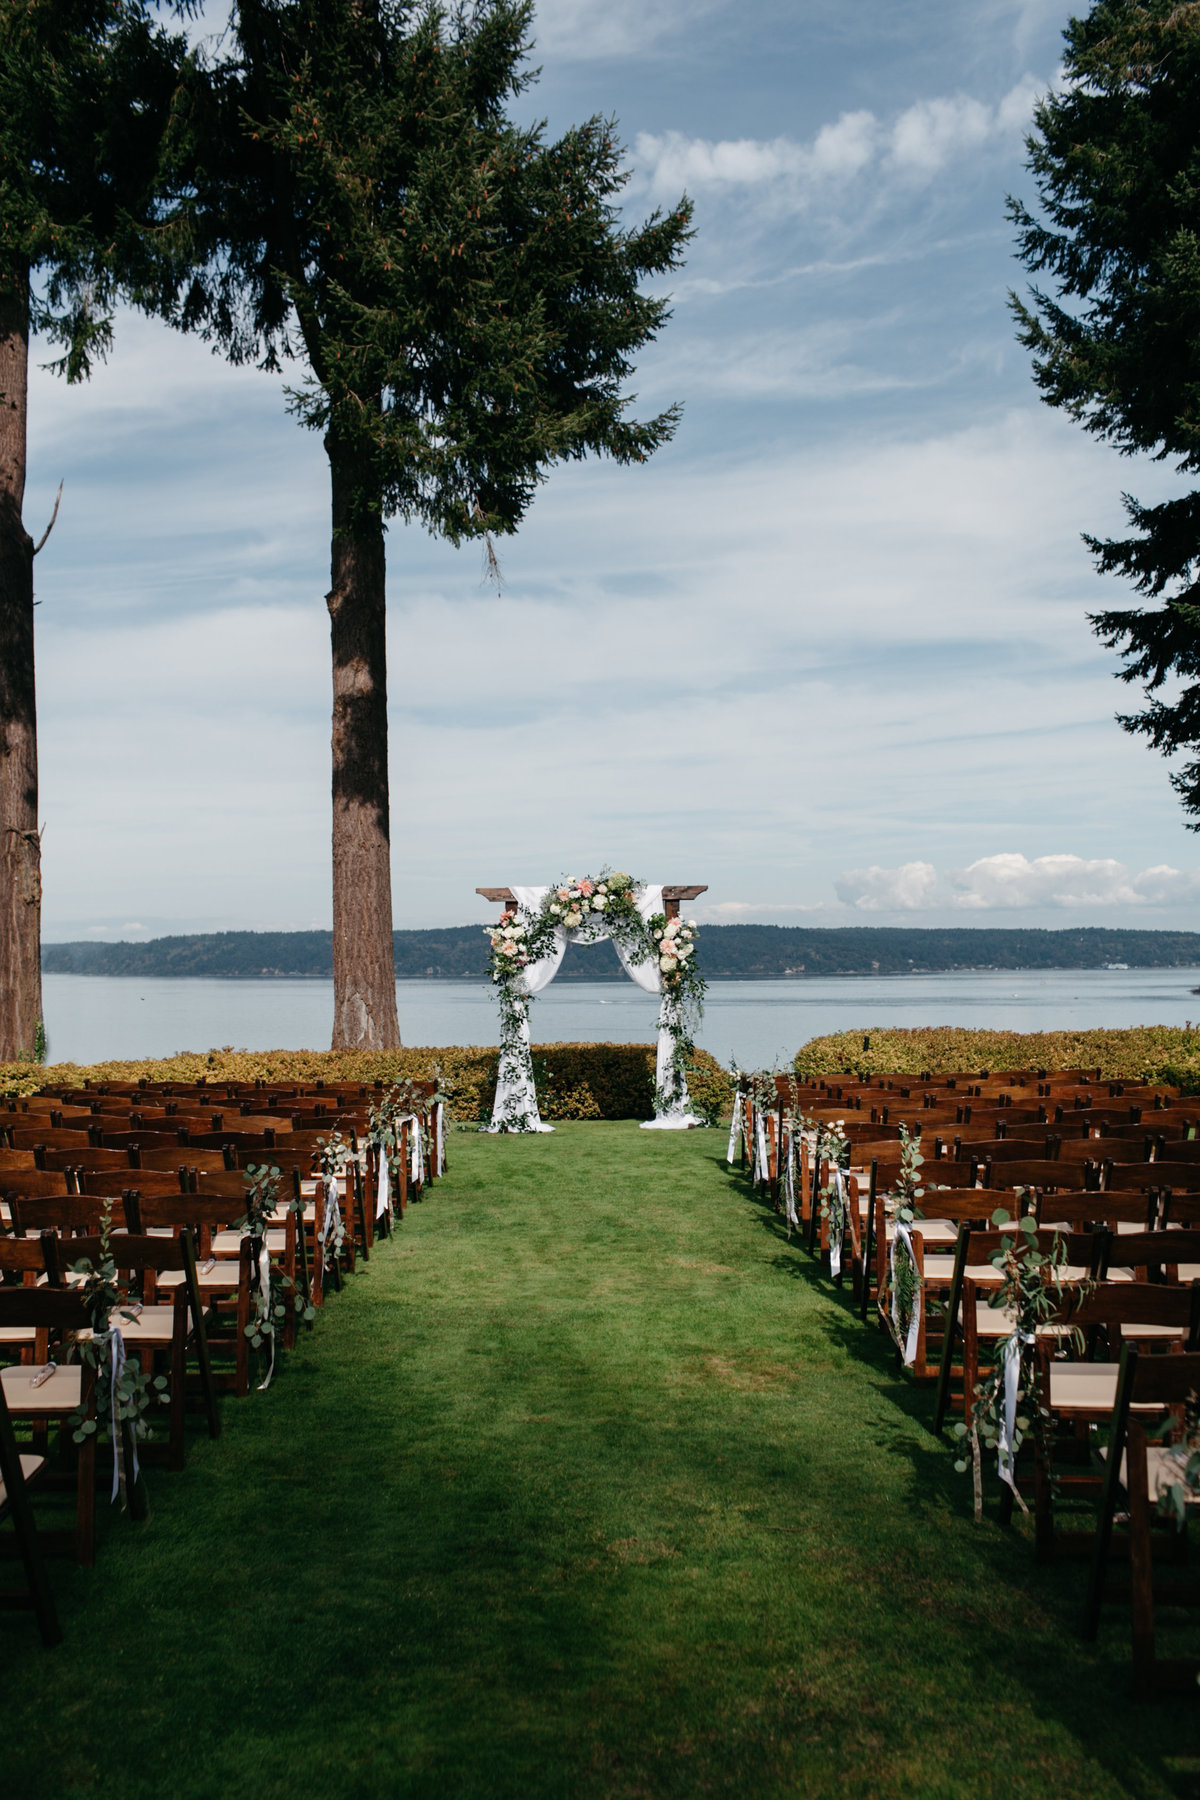 Stunning outdoor wedding on the water in Seattle.